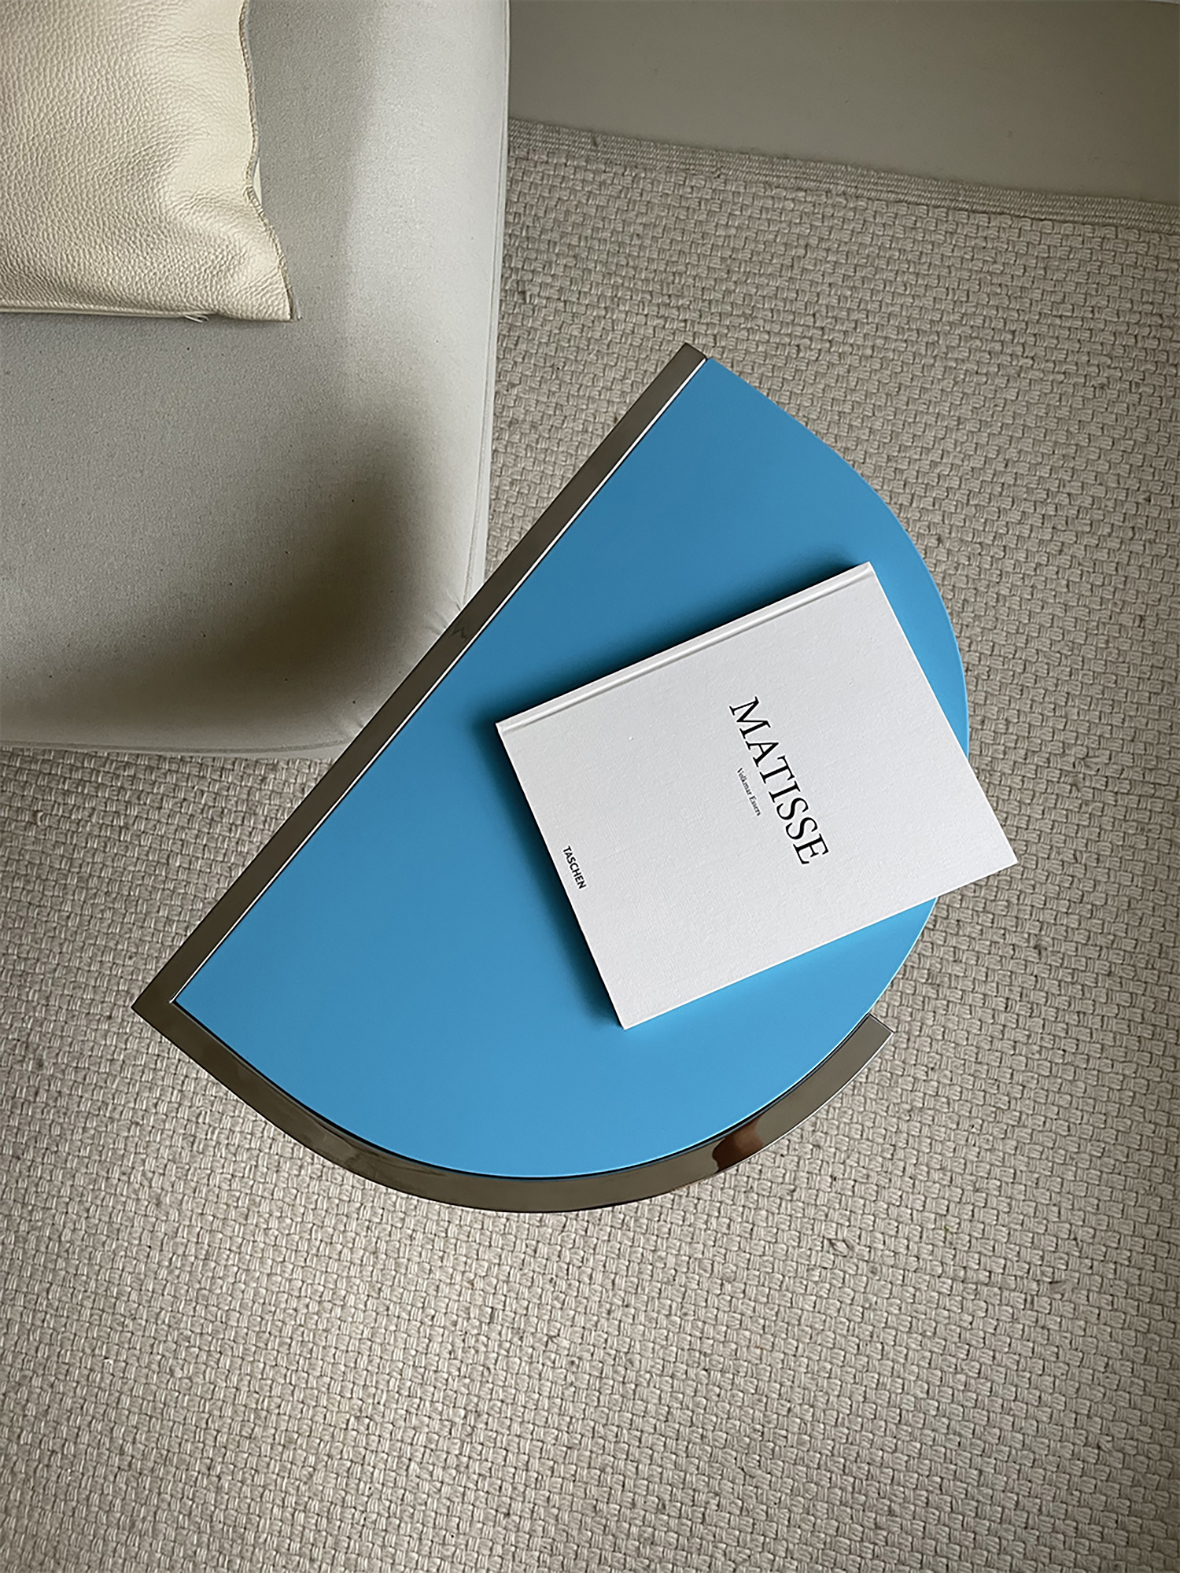 FLAQ side table	